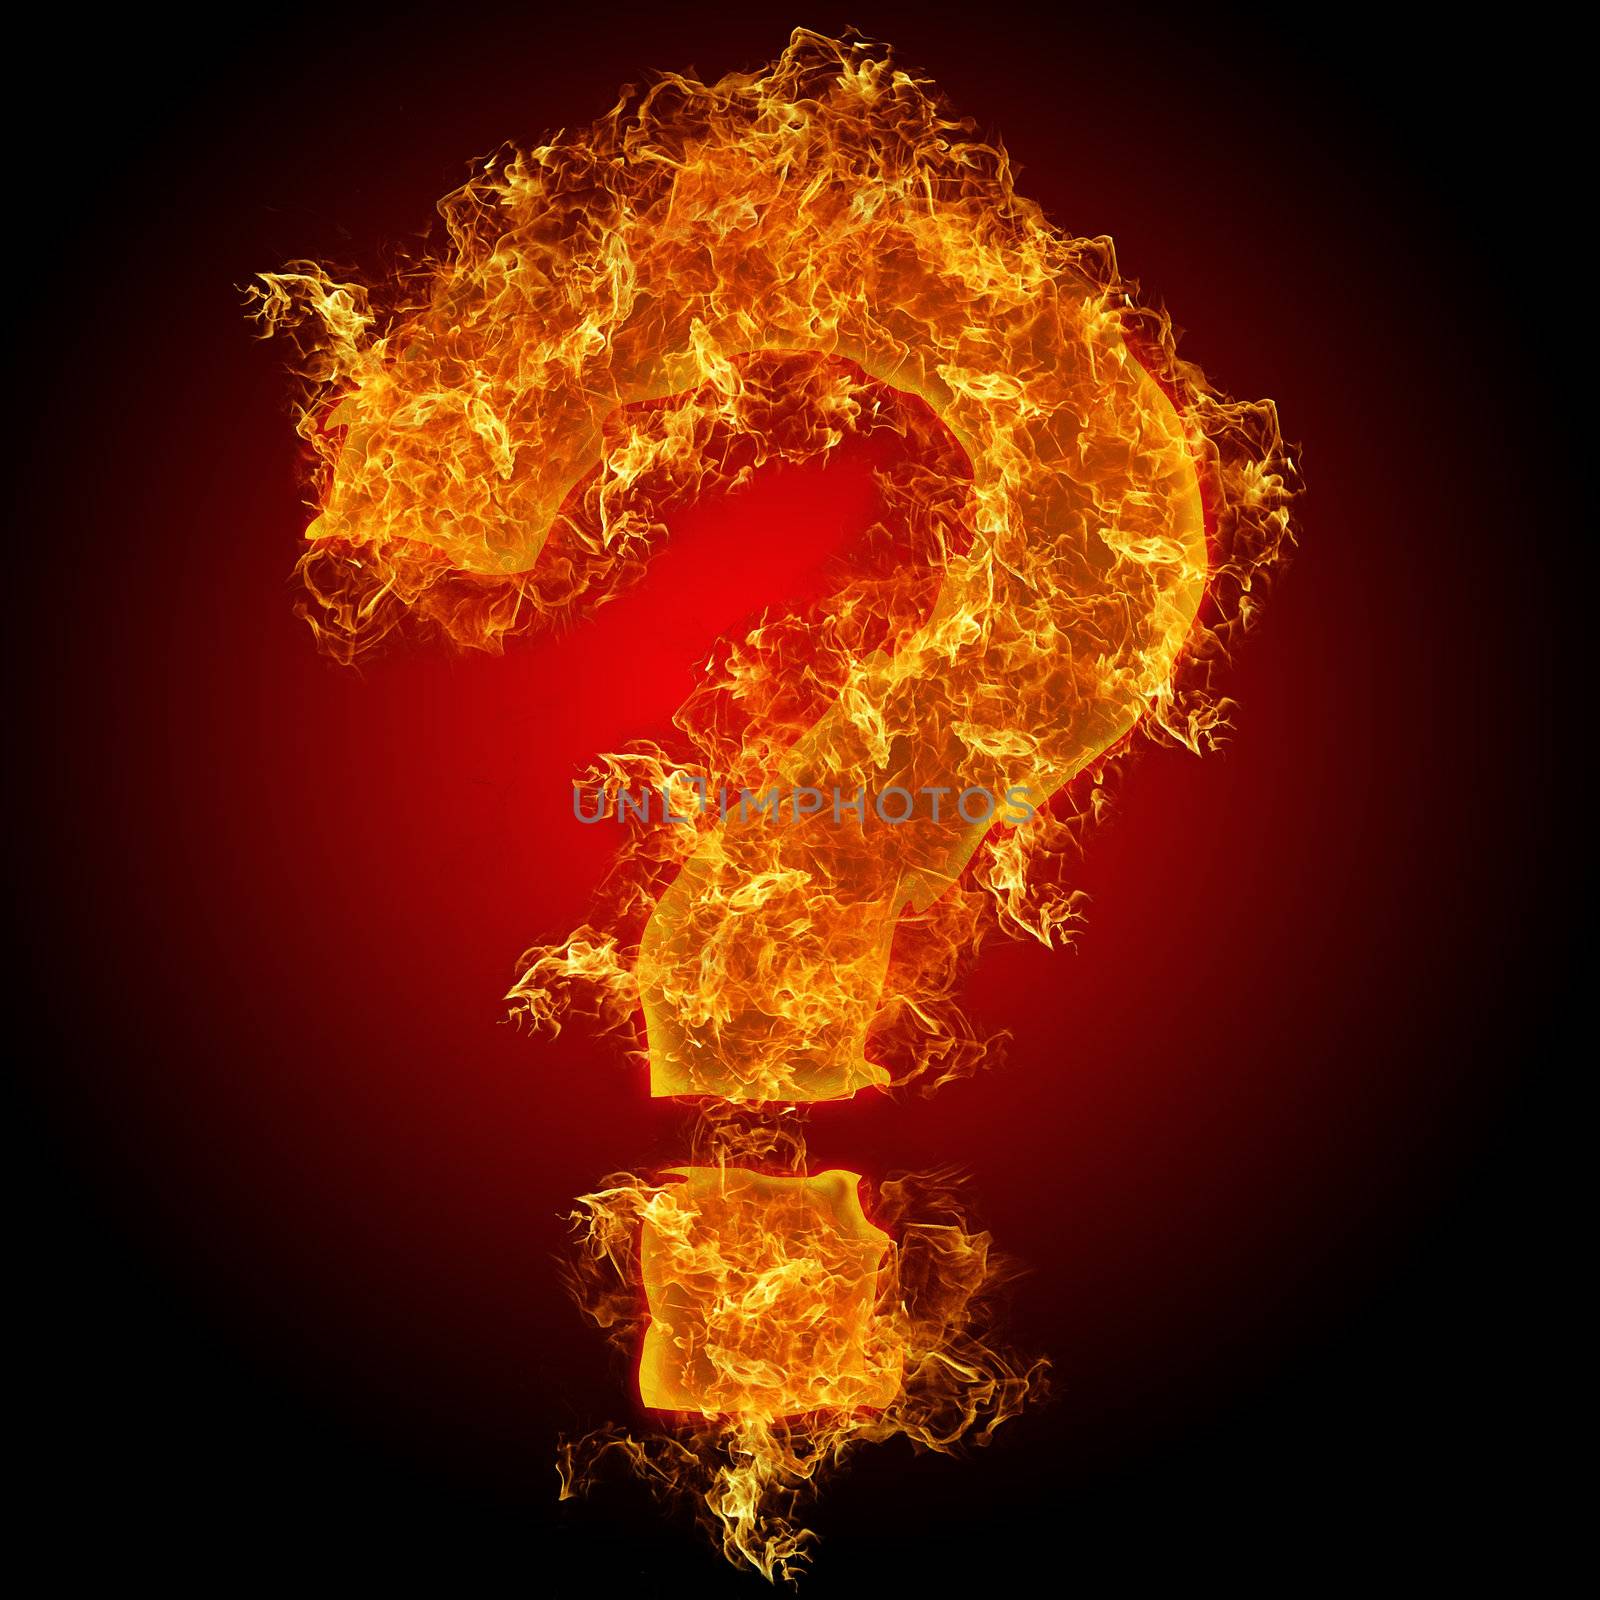 Fire sign query mark on a black background